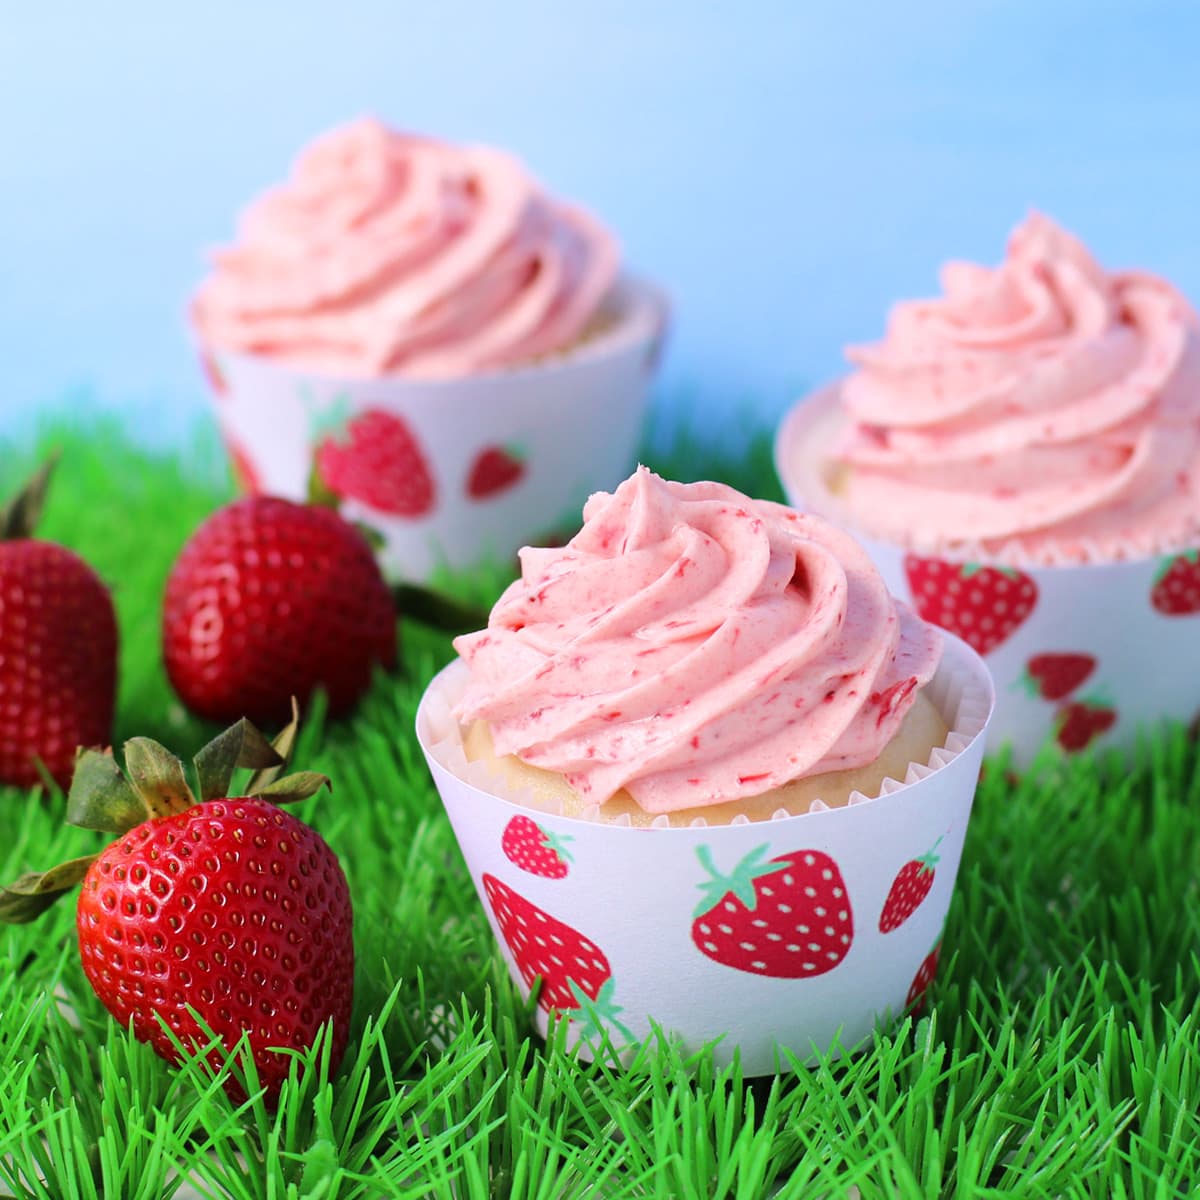 filled strawberry cupcakes topped with a swirl of strawberry frosting are wrapped in printed strawberry cupcake wrappers and are sitting in grass next to fresh strawberries.